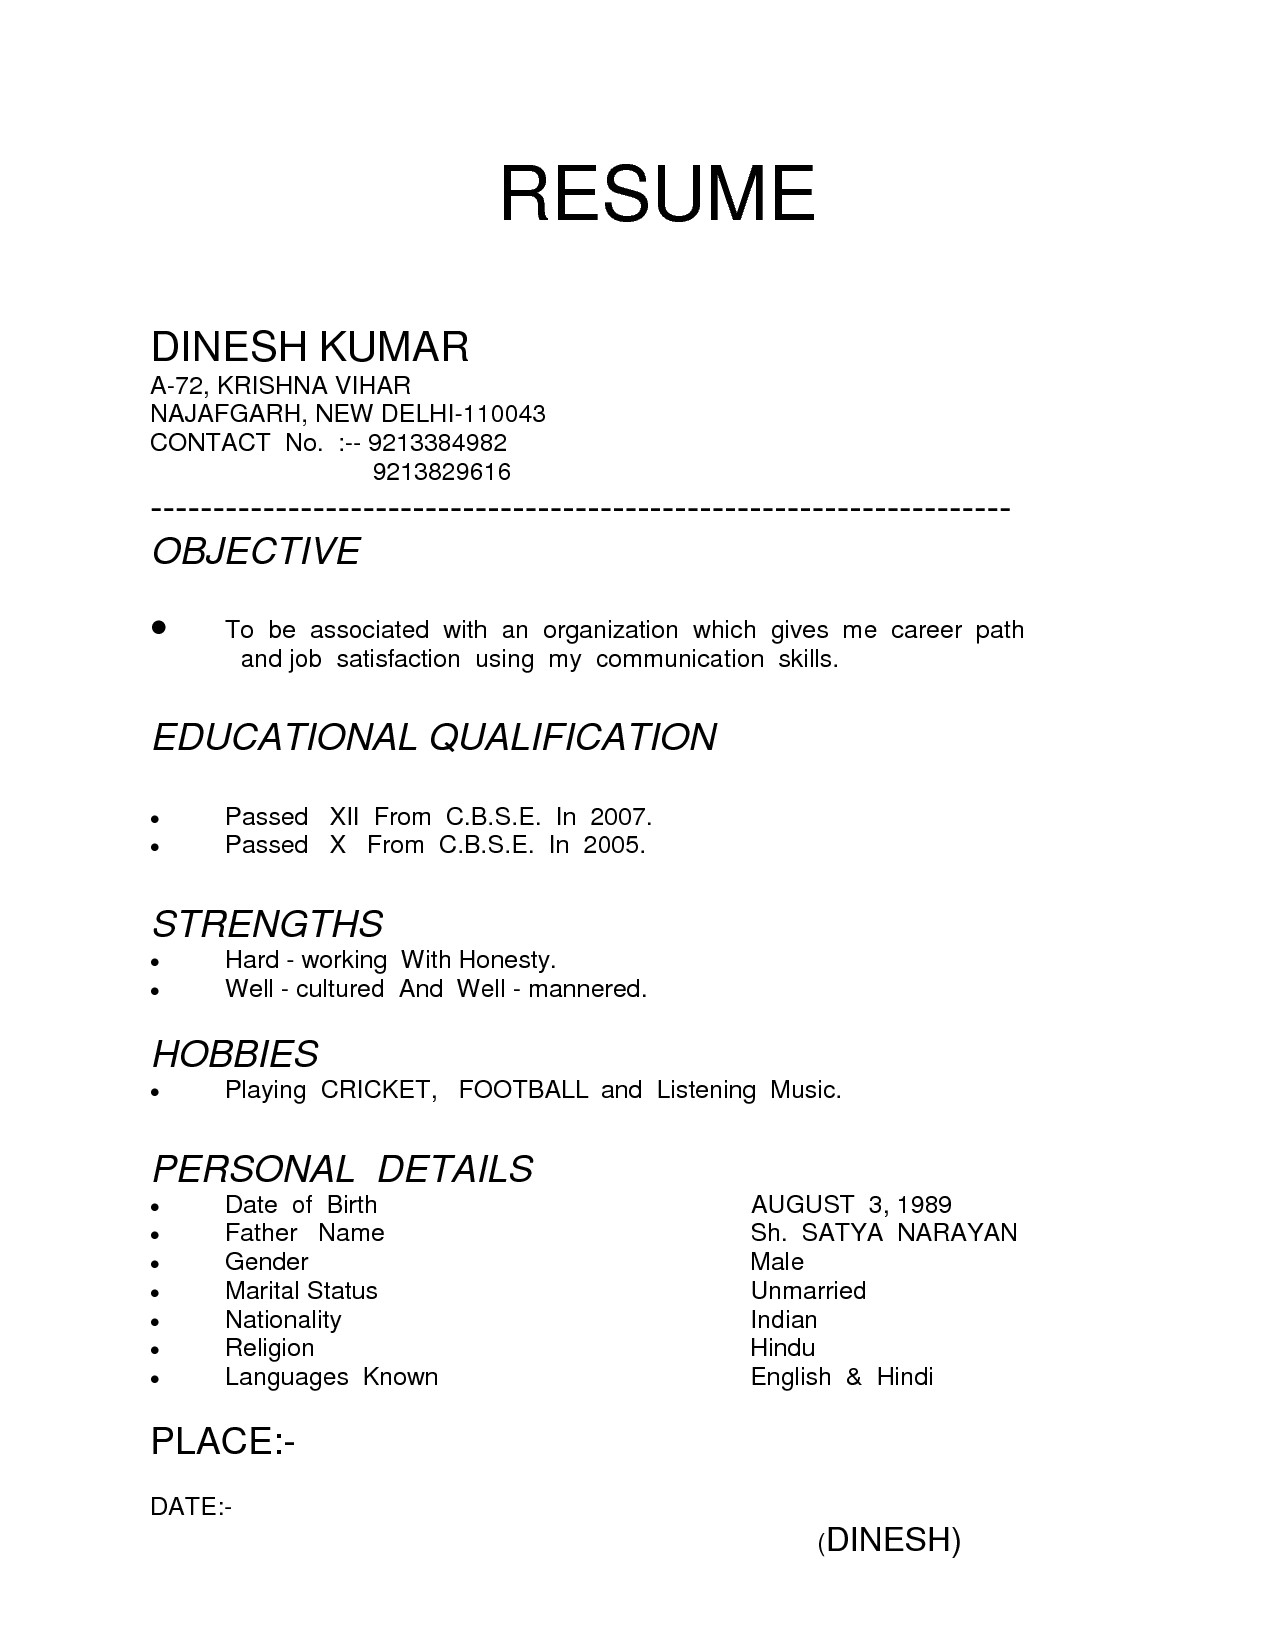 Sample Resume for All Types Of Jobs Resume Examples This Website is for Sale Resume